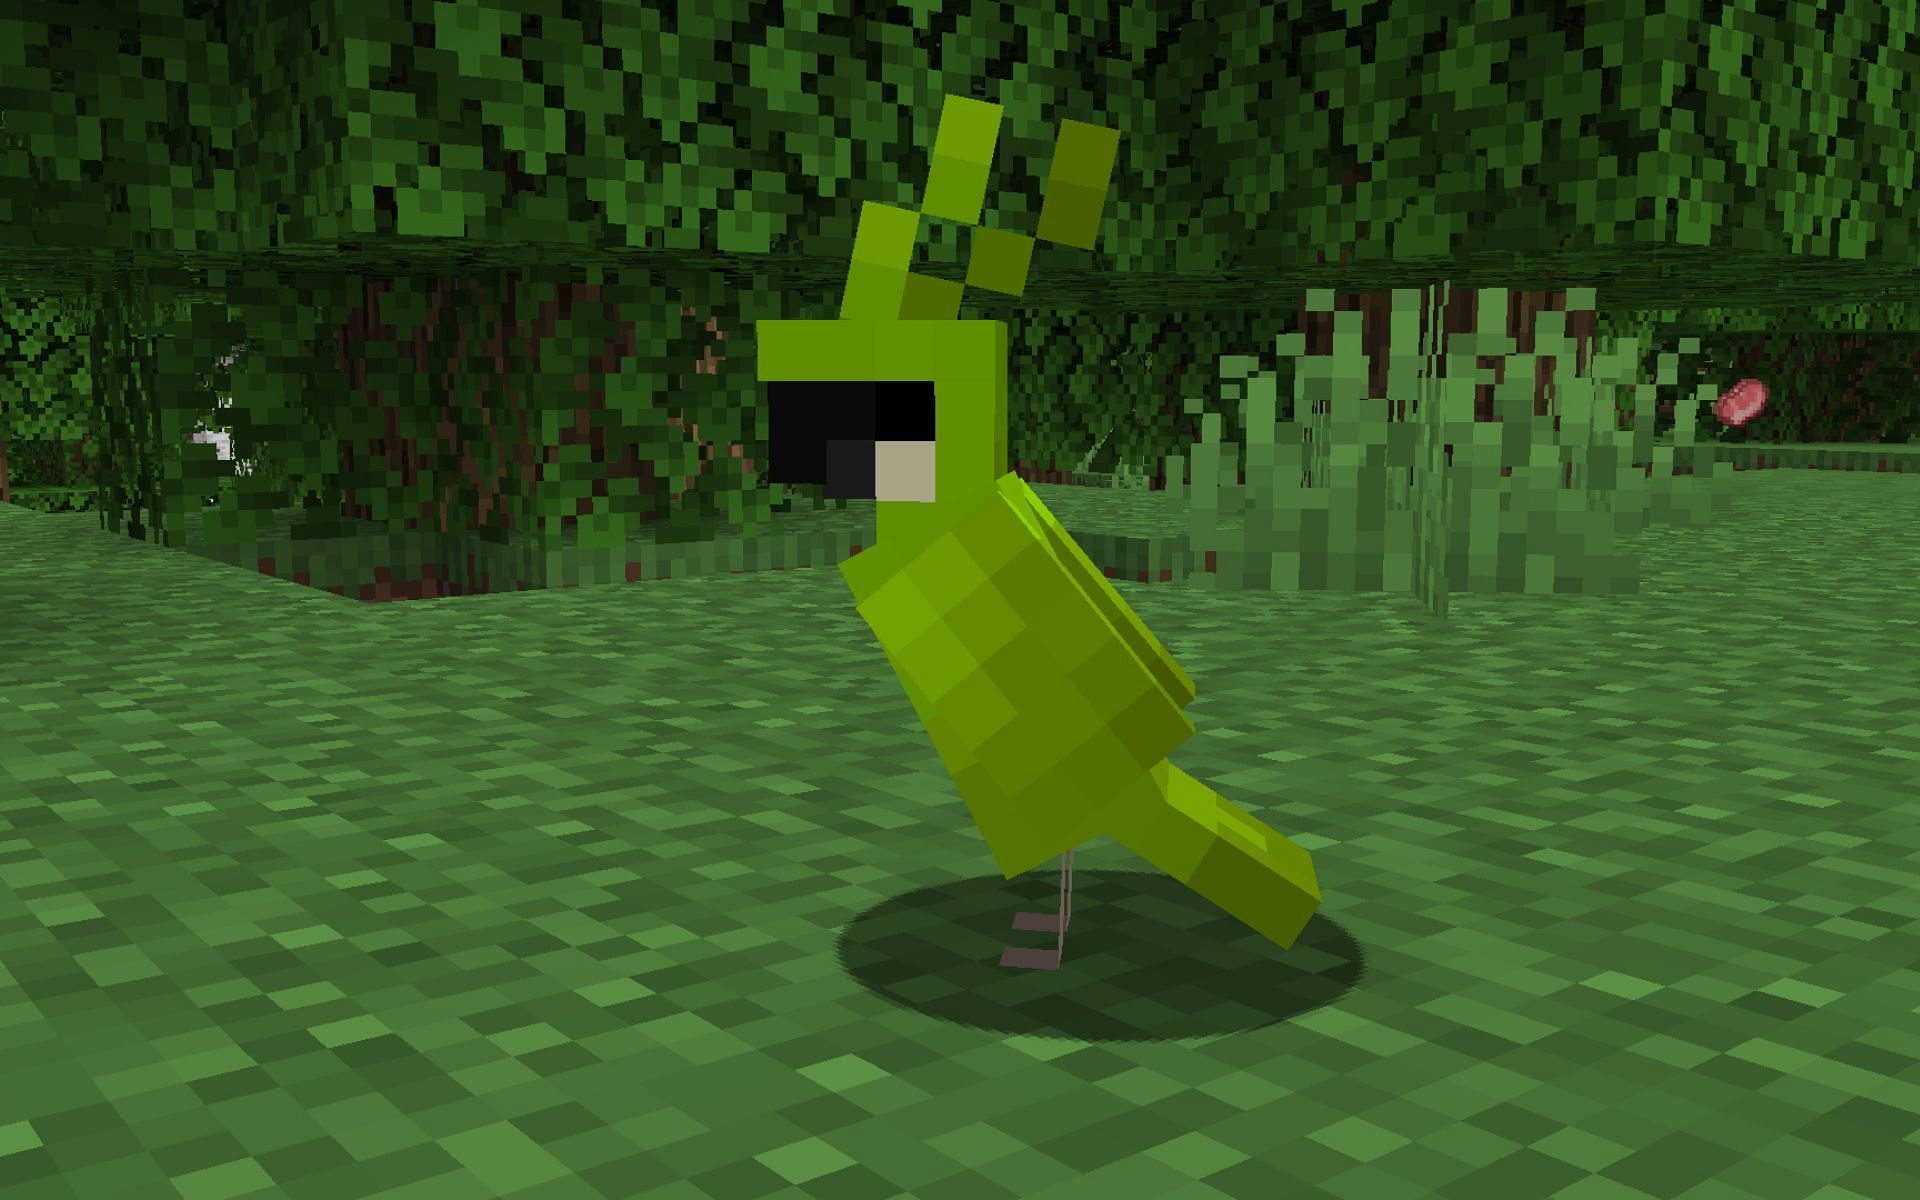 Parrots can imitate the sounds of various mobs in Minecraft (Image via Mojang)